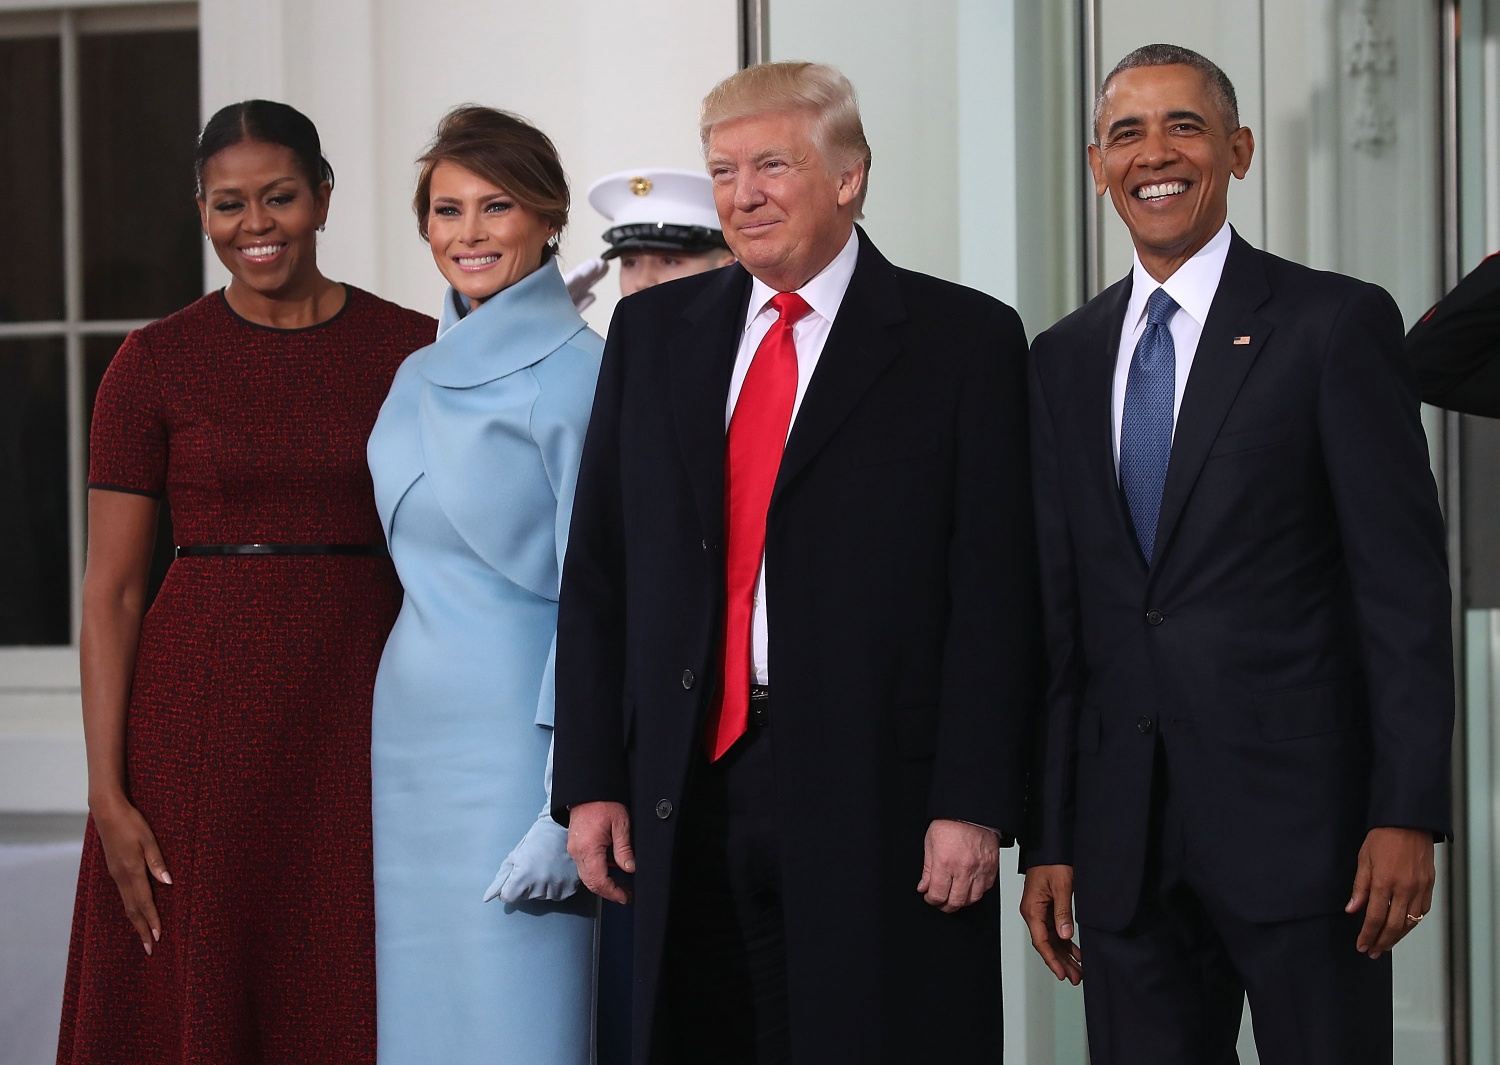 Donald Trump, Melania Trump, President Barack Obama and his wife first lady Michelle Obama